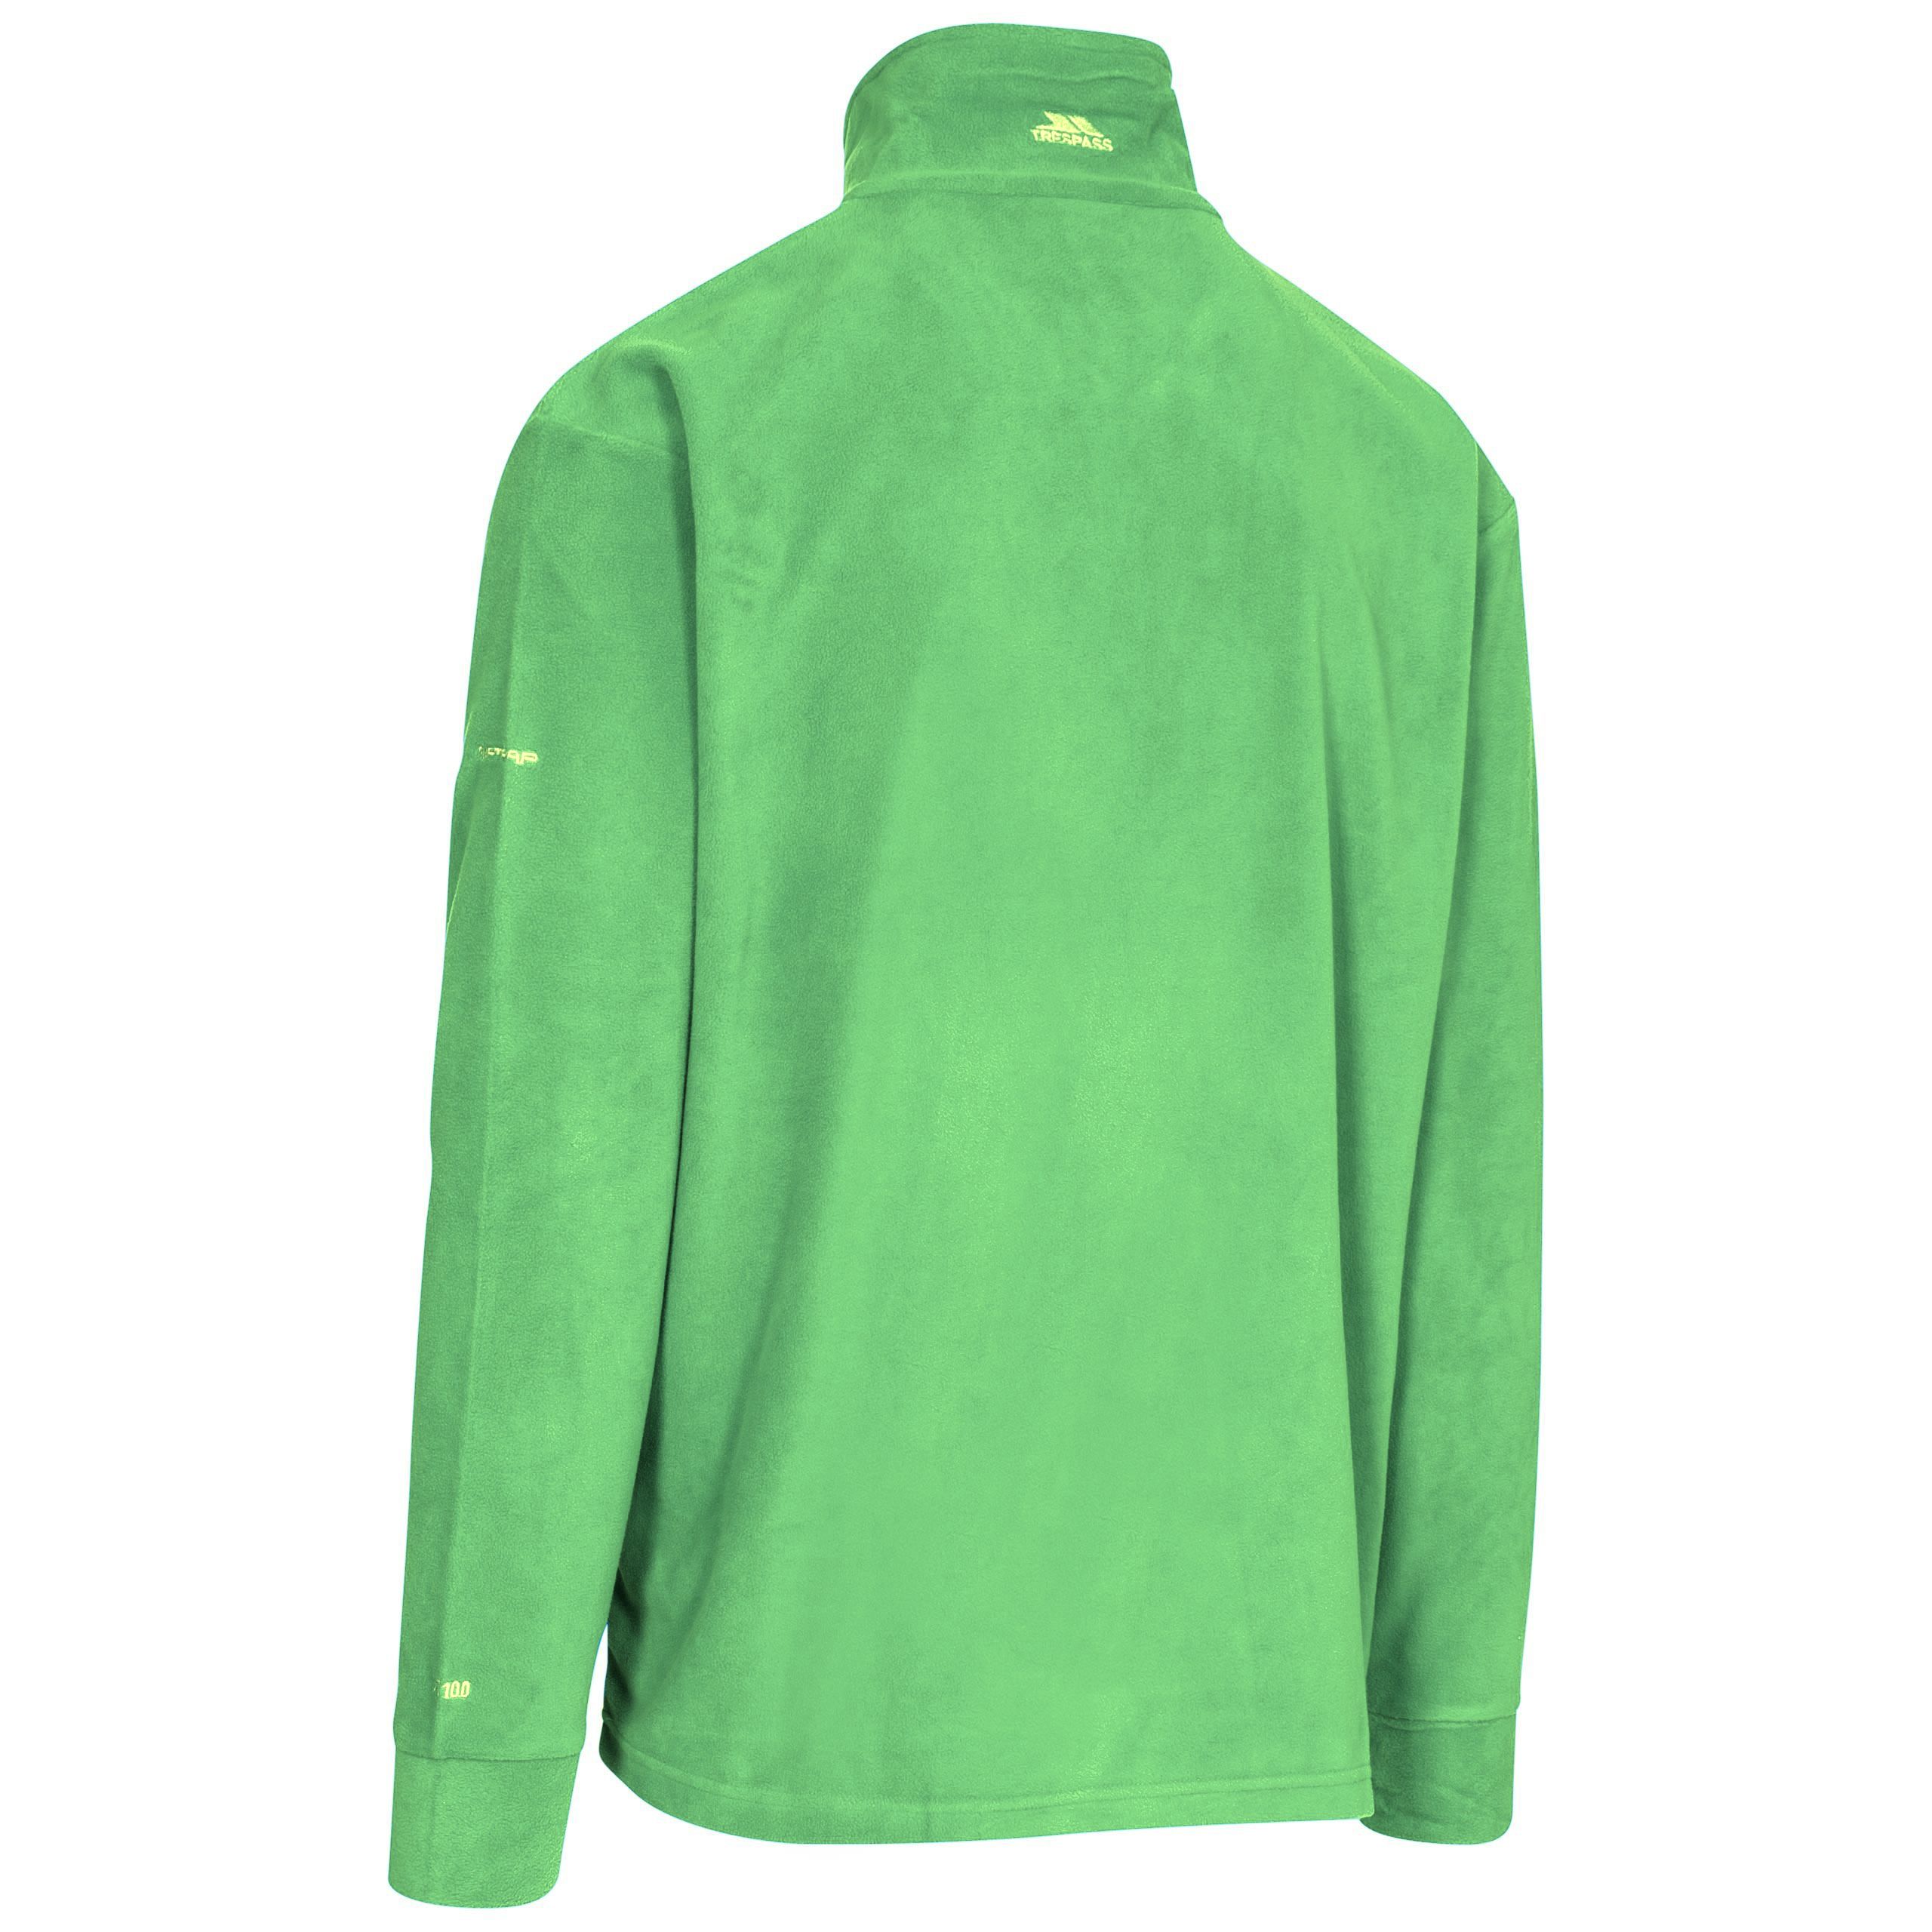 Childrens microfleece top. 130gsm Airtrap fleece build to trap and hold onto body heat. 1/2 zip neck. 100% Polyester Microfleece.